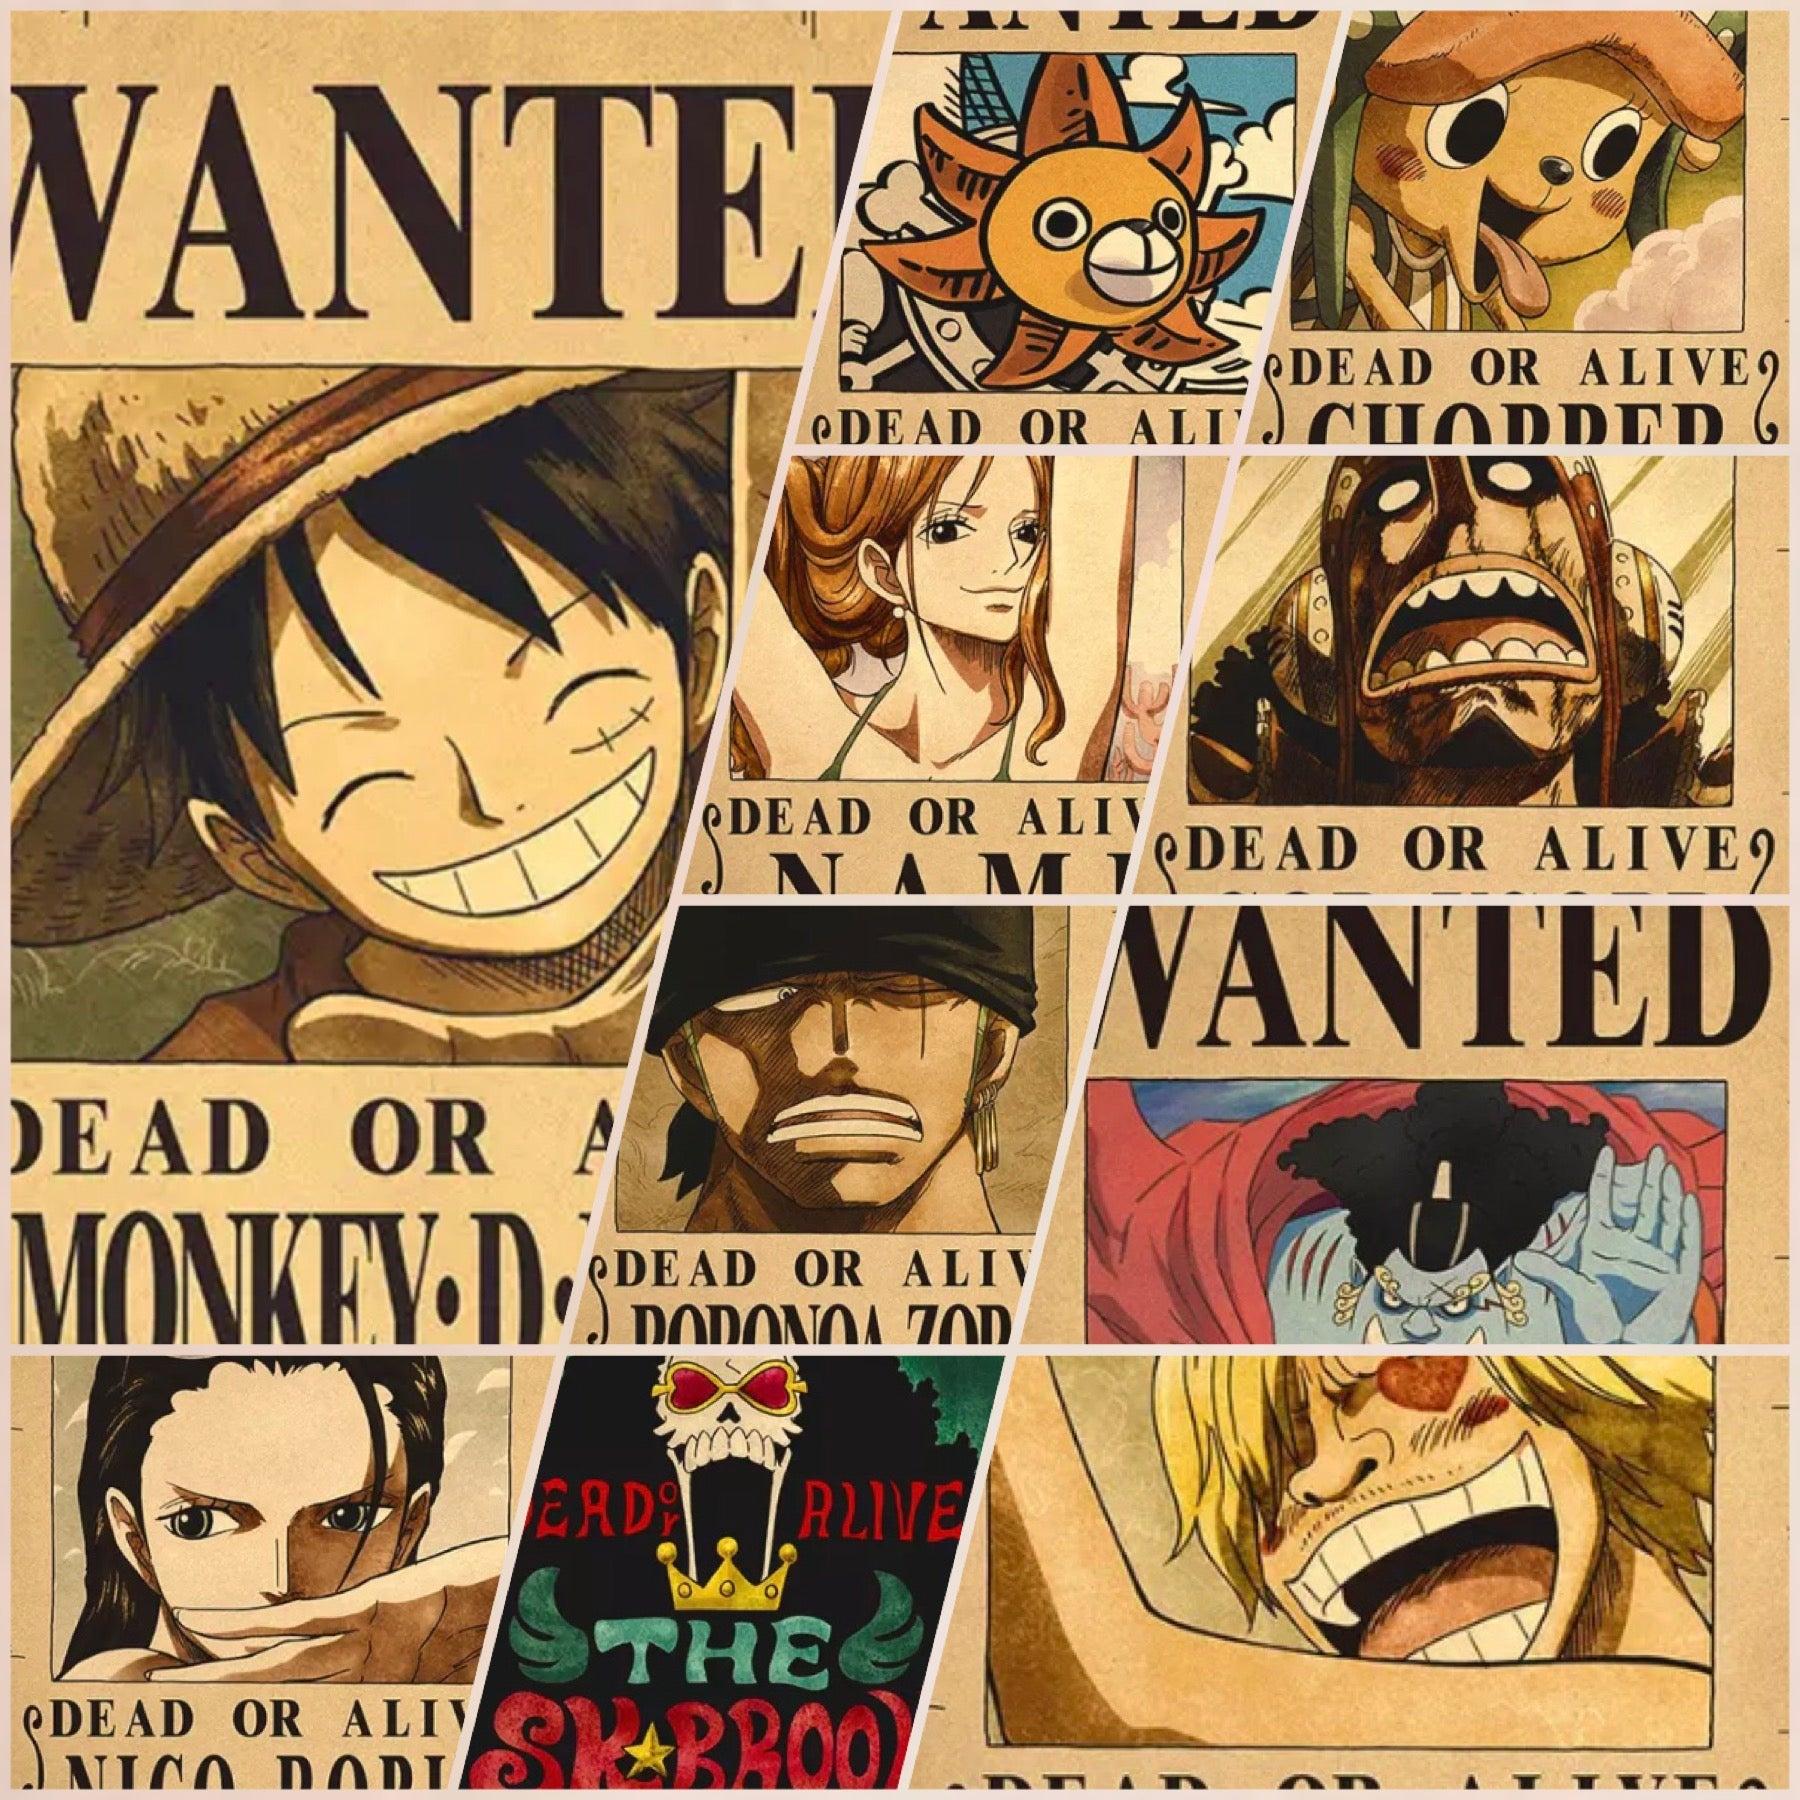 Chopper Wanted Poster Wallpapers - Top Free Chopper Wanted Poster ...